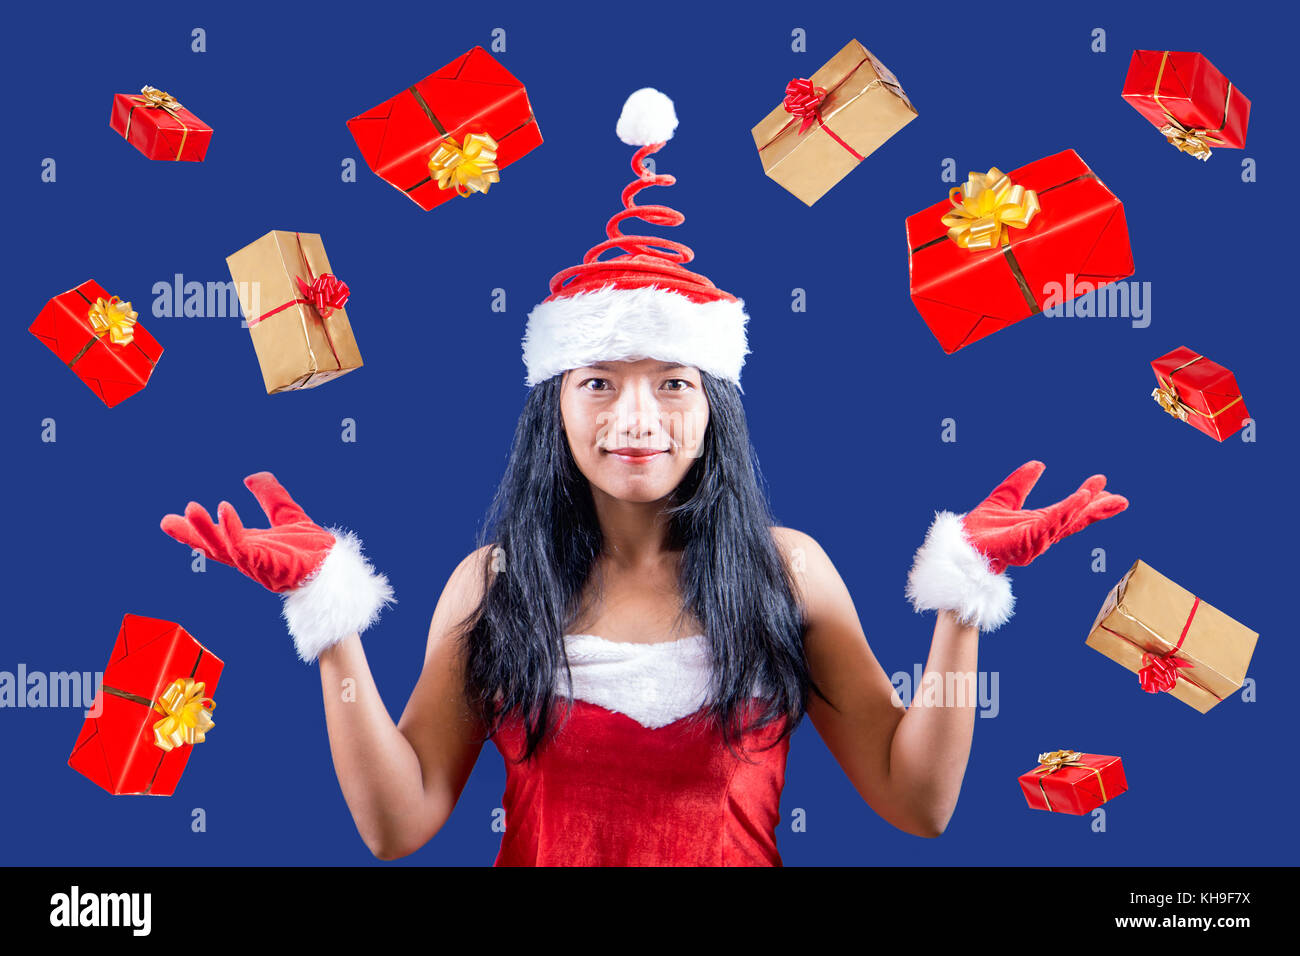 Cheerful Mrs. Claus looks at the camera and juggle with Christmas gifts. Xmas boxes are falling around Mrs. Santa Claus. Mrs Claus giving gifts. Stock Photo